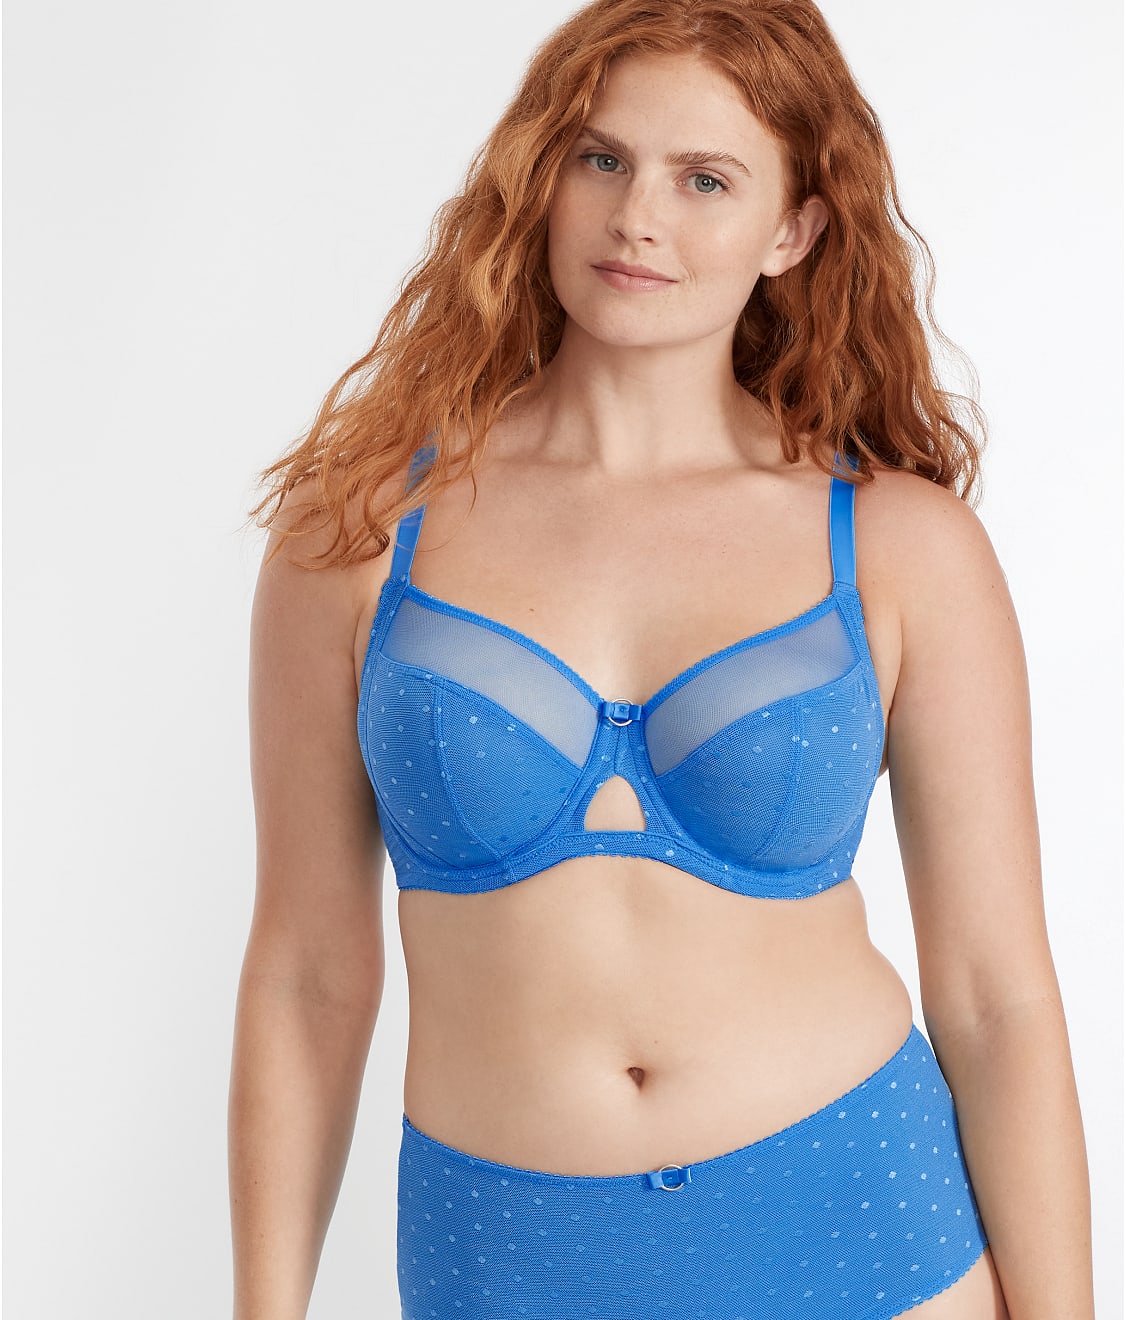 Cups too big or wire too wide? 32H - Curvy Kate » Emily (CK5001